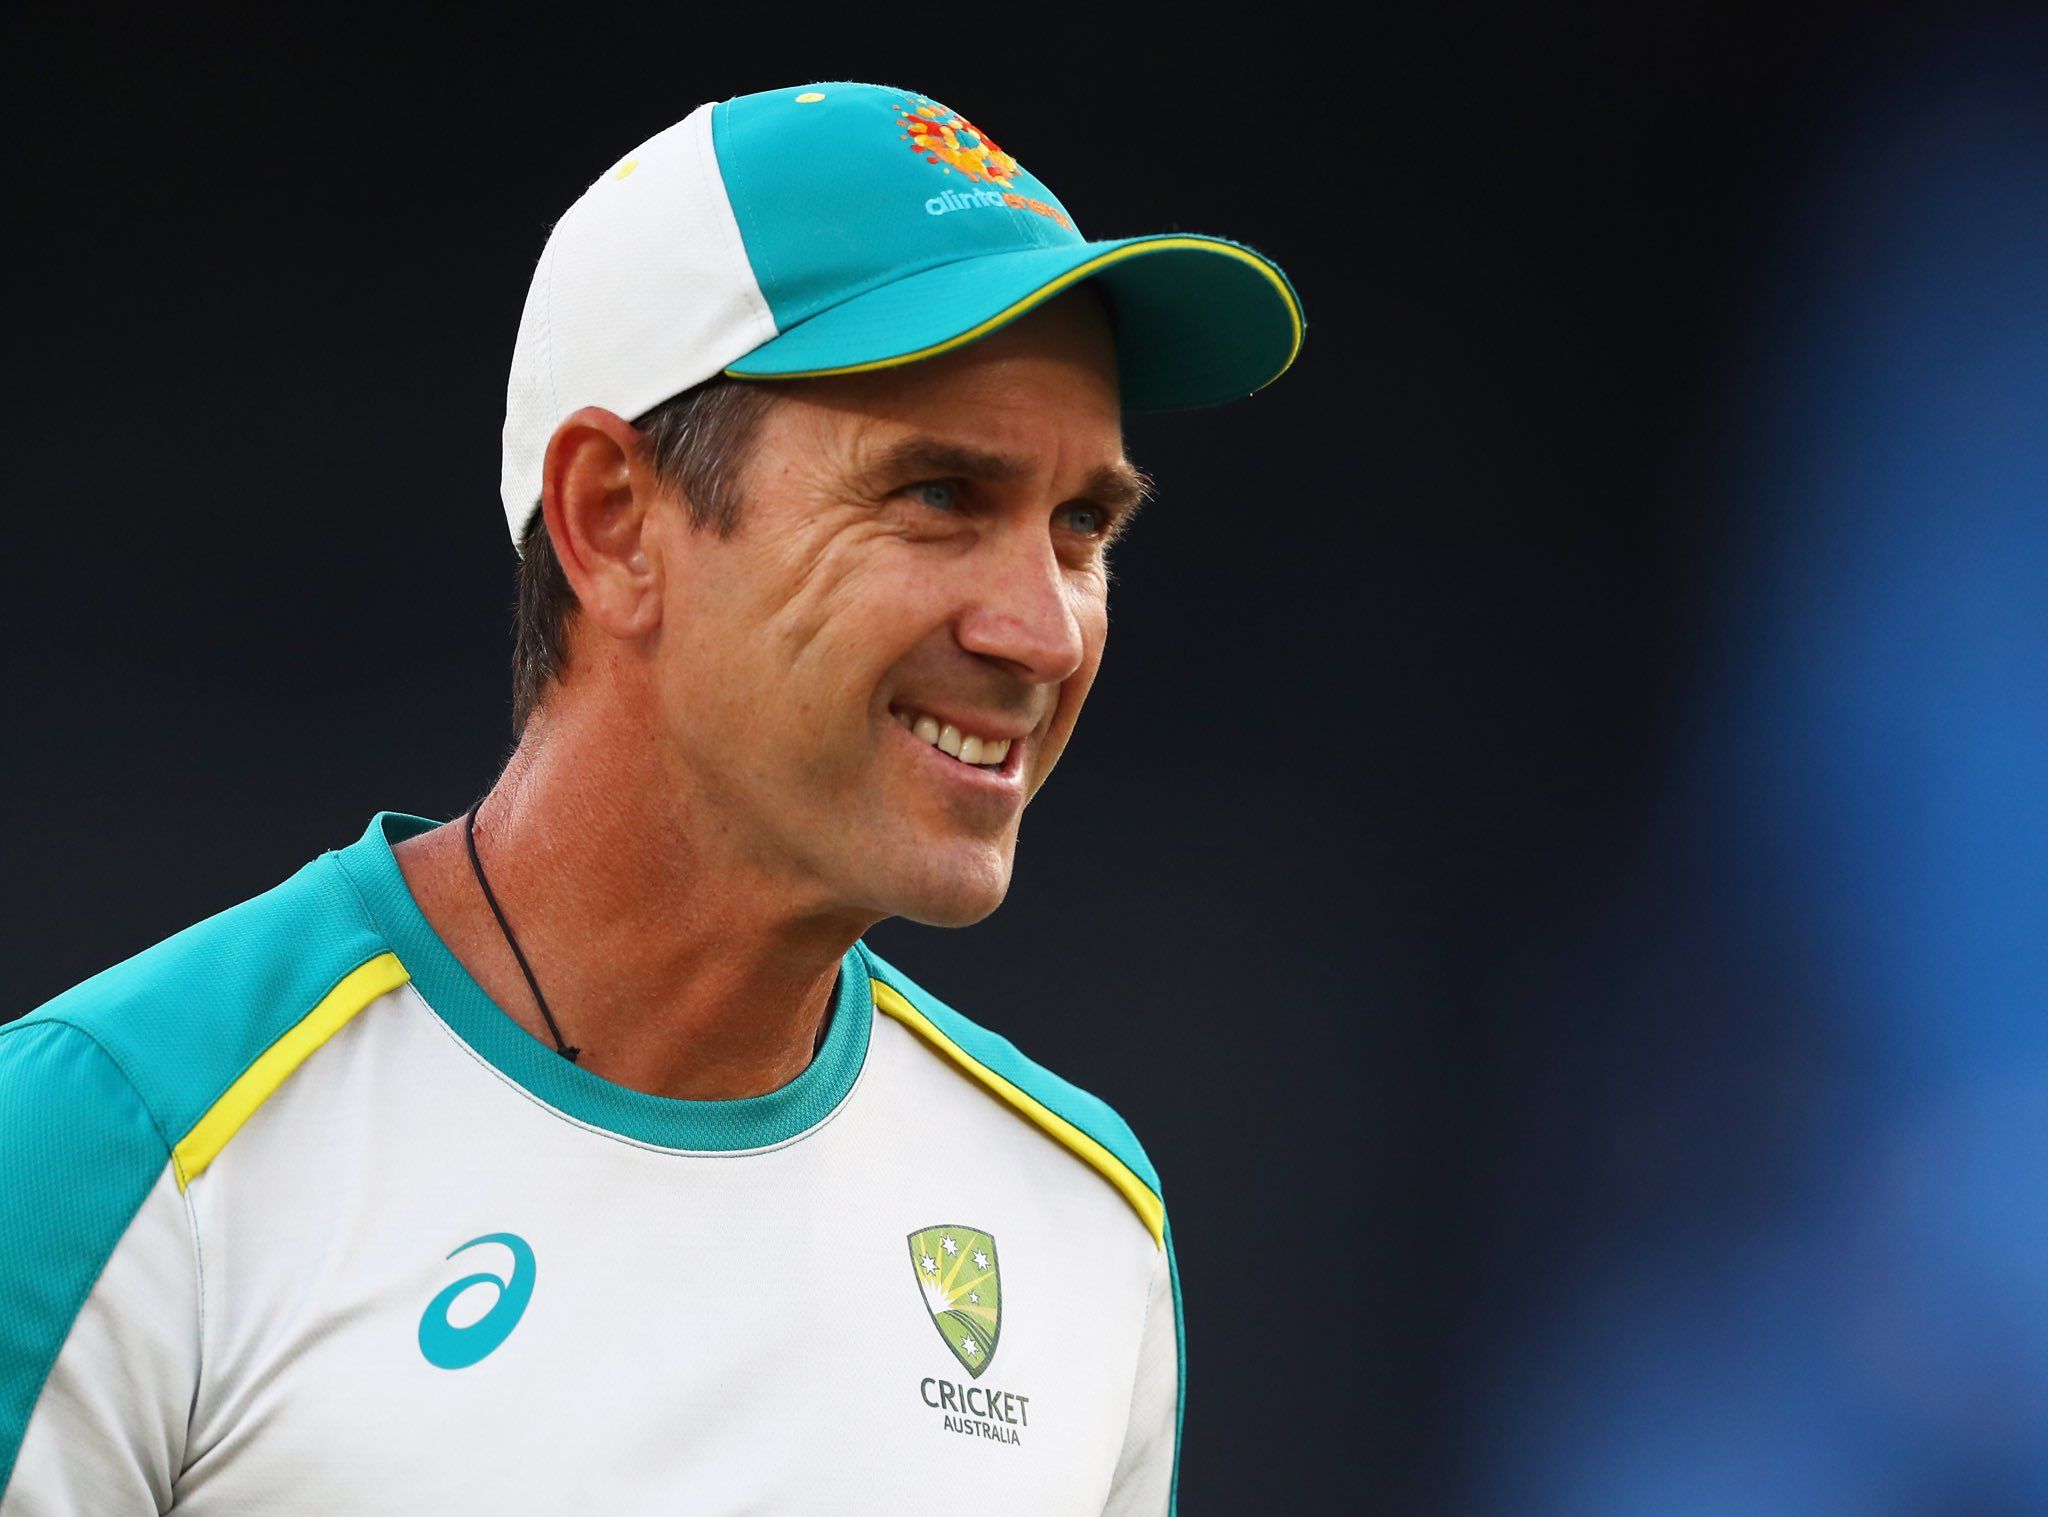 Former Australia coach Justin Langer, with integrity and dignity, moves on to the next chapter